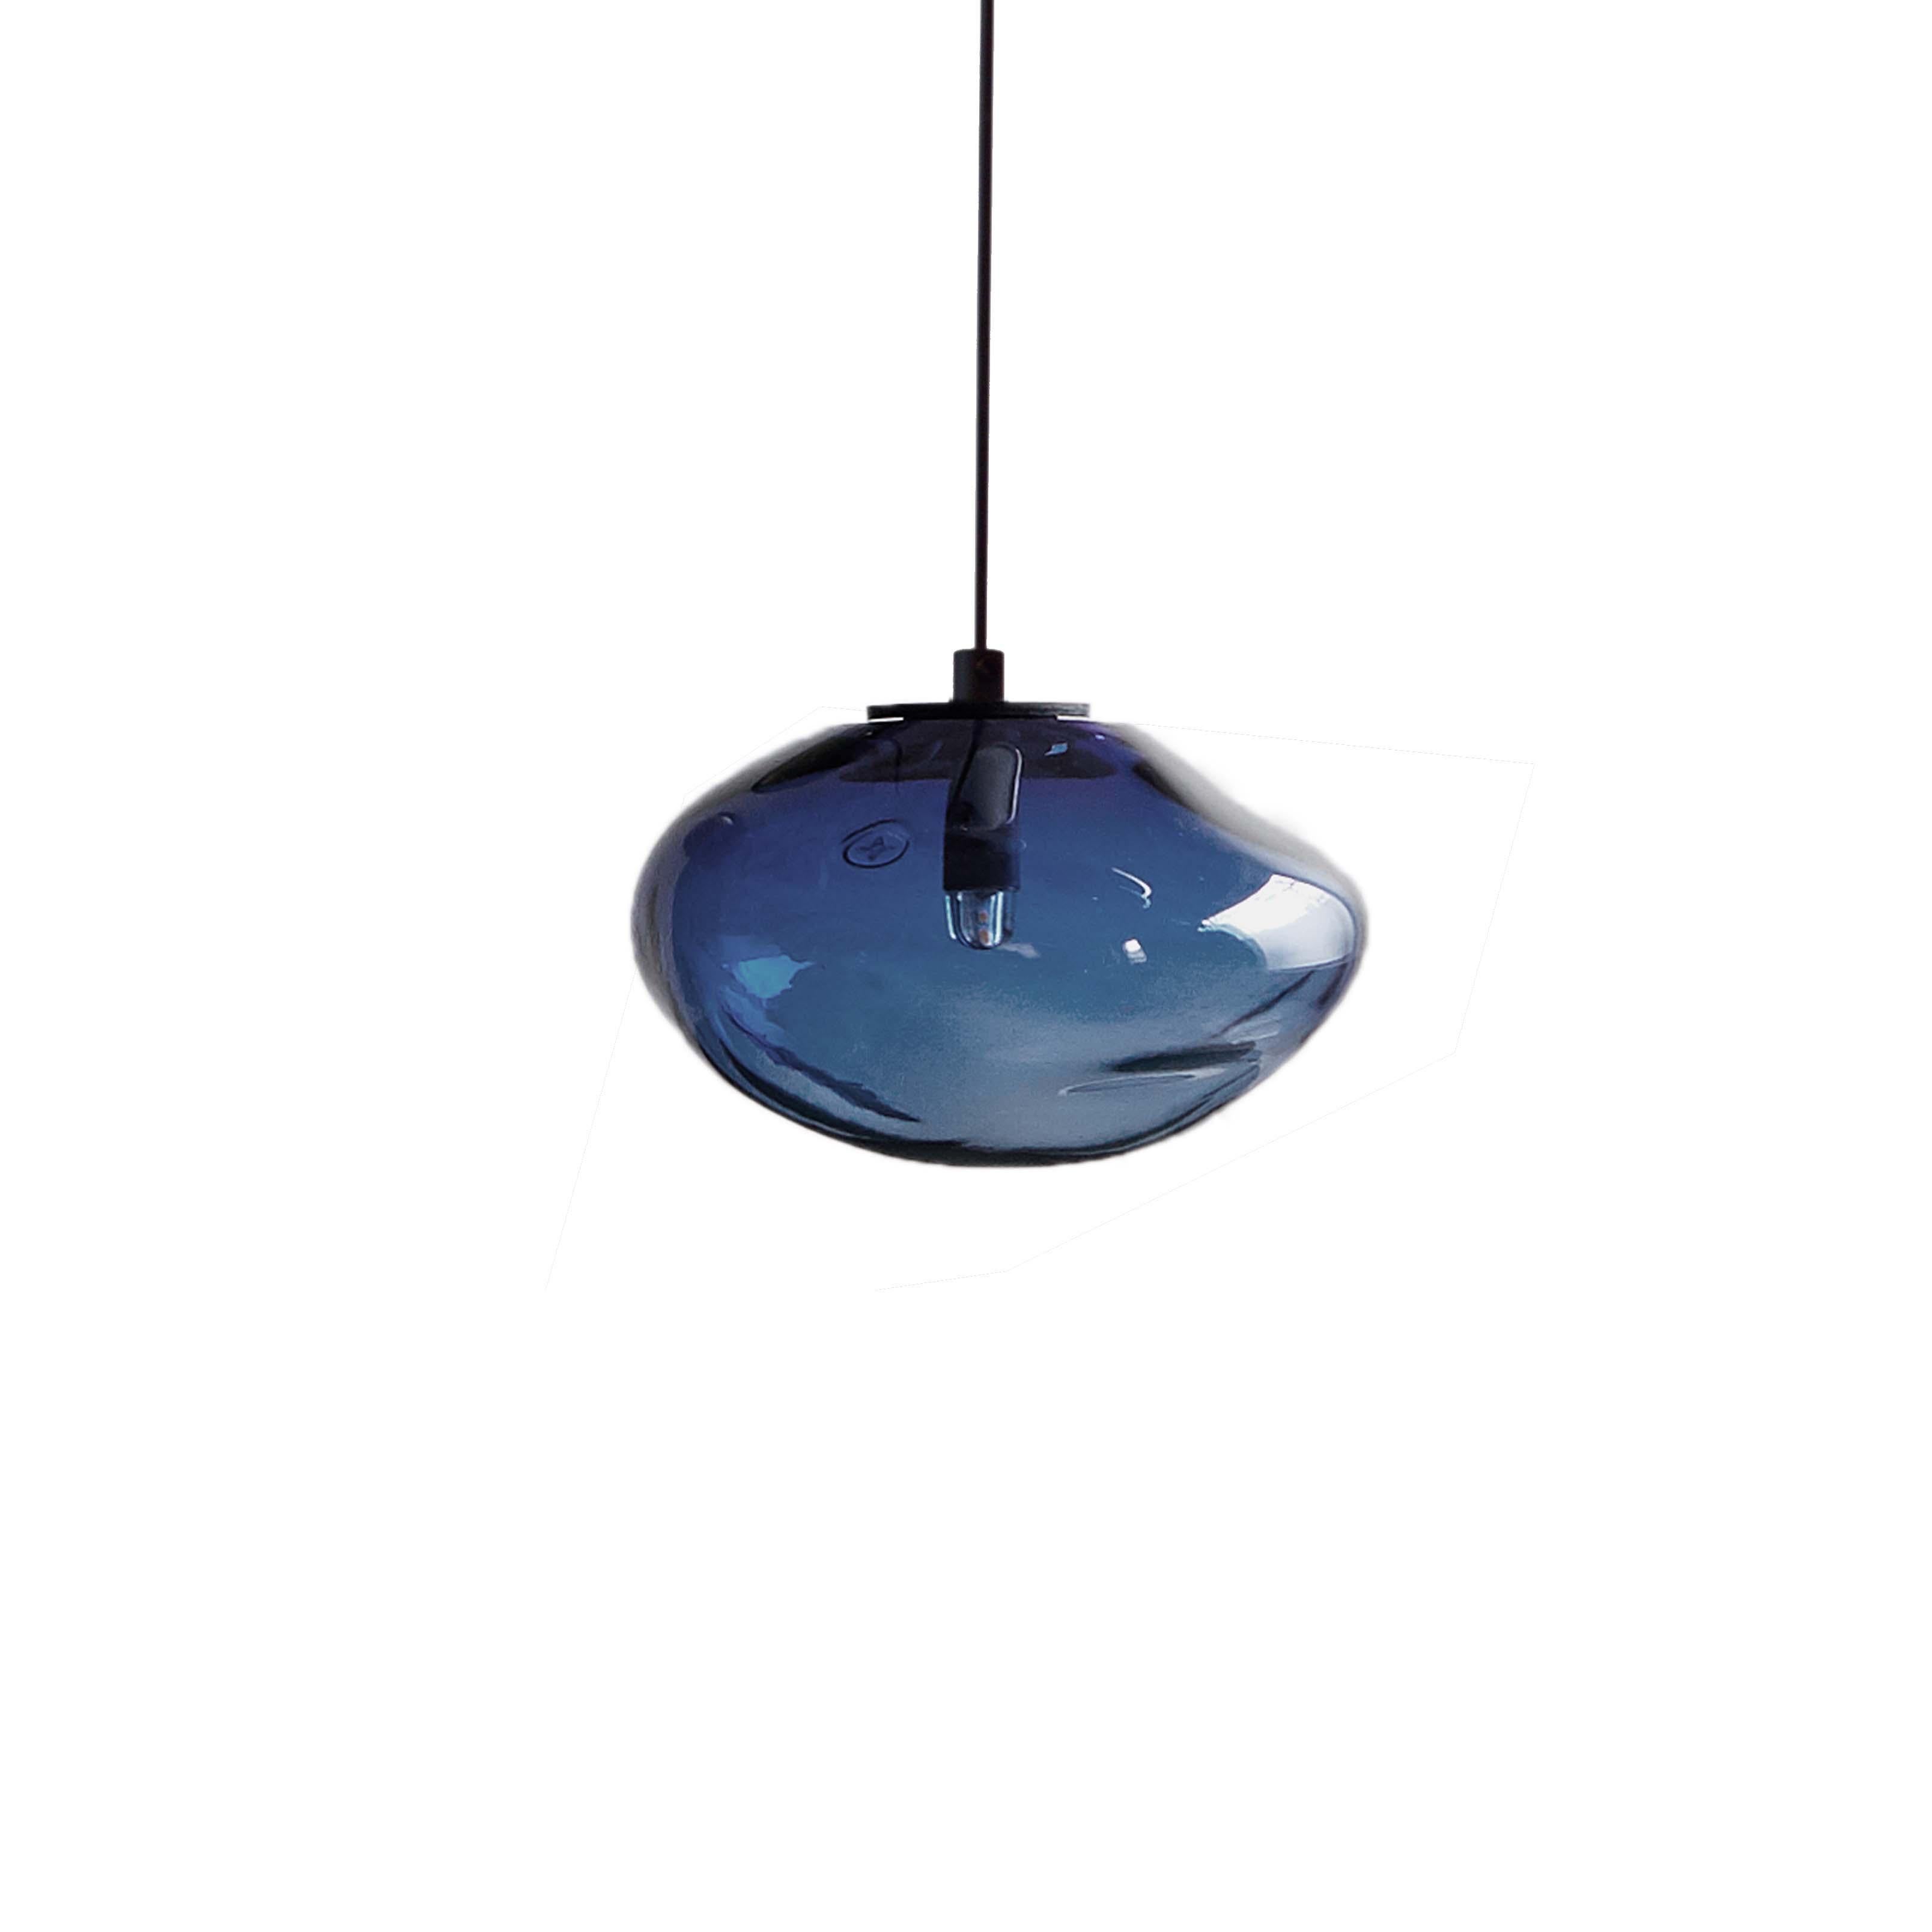 Starglow steel blue pendant by Eloa.
Material: glass, steel, silver.
Dimensions: D 15 x W 13 x H 100 cm
Also available in different colours and dimensions.

All our lamps can be wired according to each country. If sold to the USA it will be